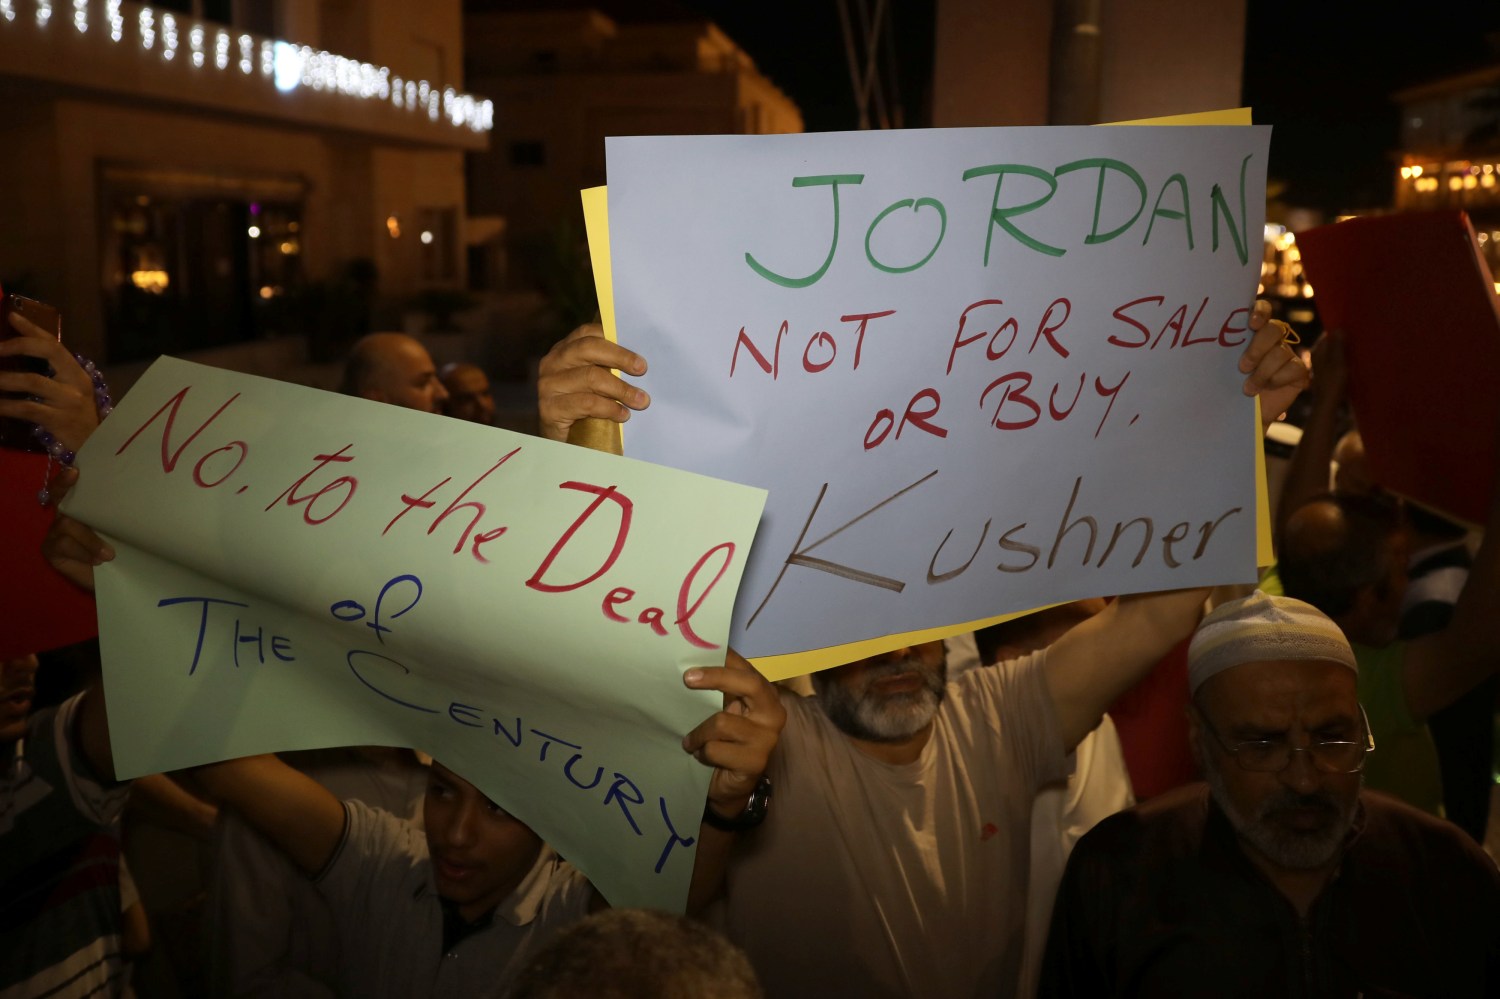 Members of the Muslim Brotherhood take part in a sit-in against the Senior White House Advisor Jared Kushner's visit to Jordan, near the U.S. Embassy, in Amman, Jordan, May 28, 2019. Picture taken May 28, 2019. REUTERS/Muhammad Hamed - RC16915627A0